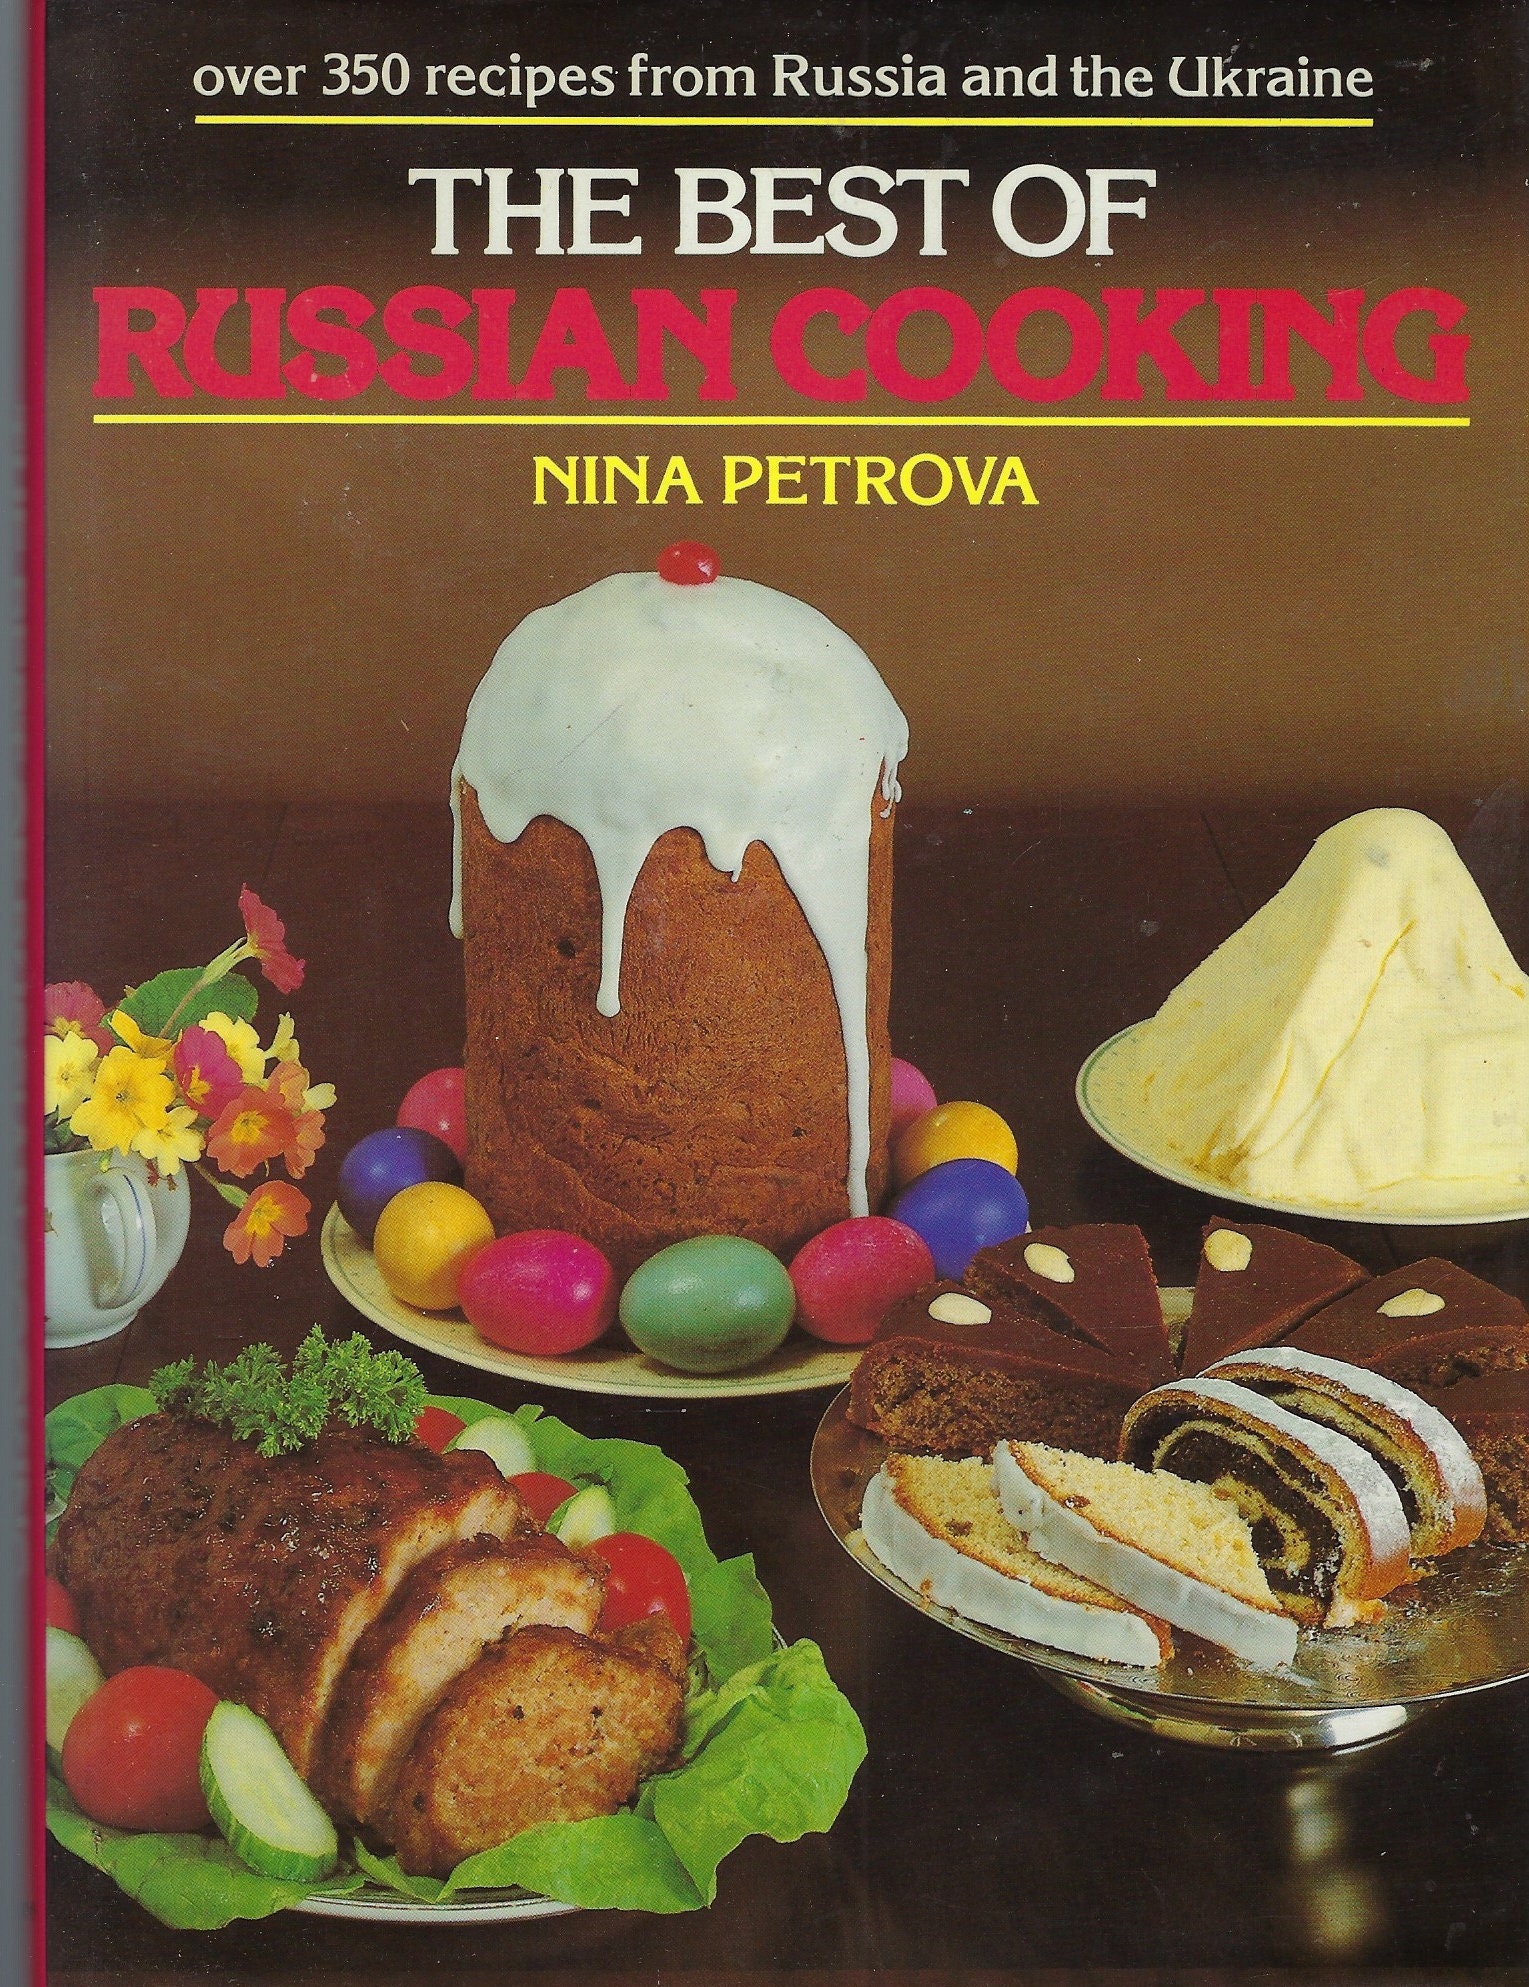 The Best Of Russian Cooking & The Ukraine Vintage Hard Cover W Dust Jacket Cookbook By Nina Petrova Gourmet & Traditional Recipes Rare